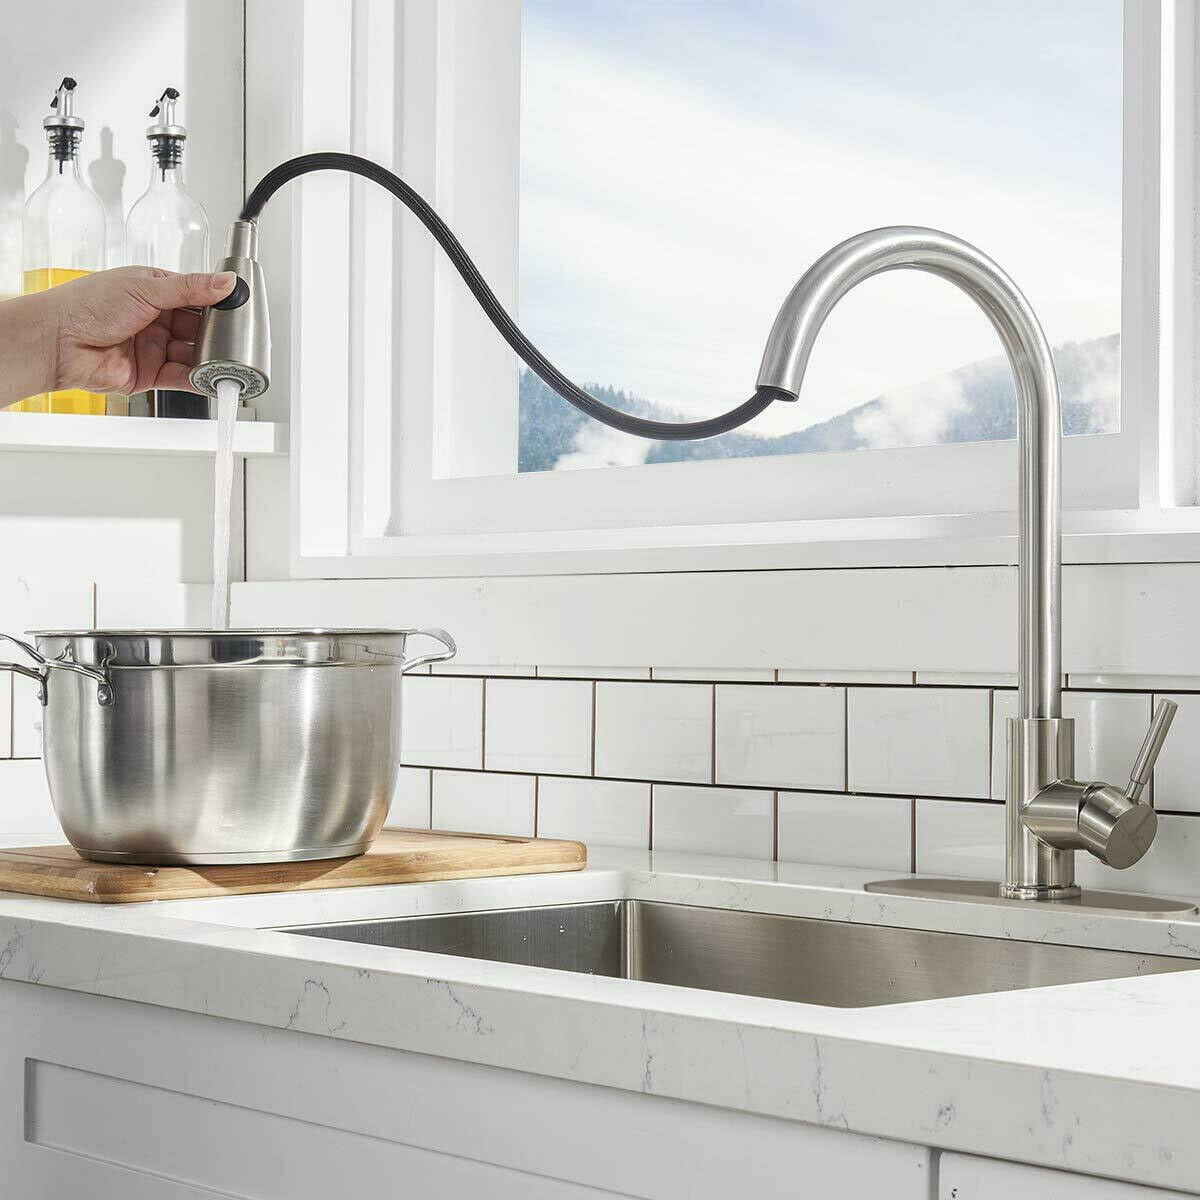 Kitchen Sink Faucet Kitchen Faucets with Pull Down Sprayer Kitchen Faucet Silver 360 Swivel High Arc Pull Out Faucet Head Commercial Faucets with Deck Plate for 1 or 3 Hole